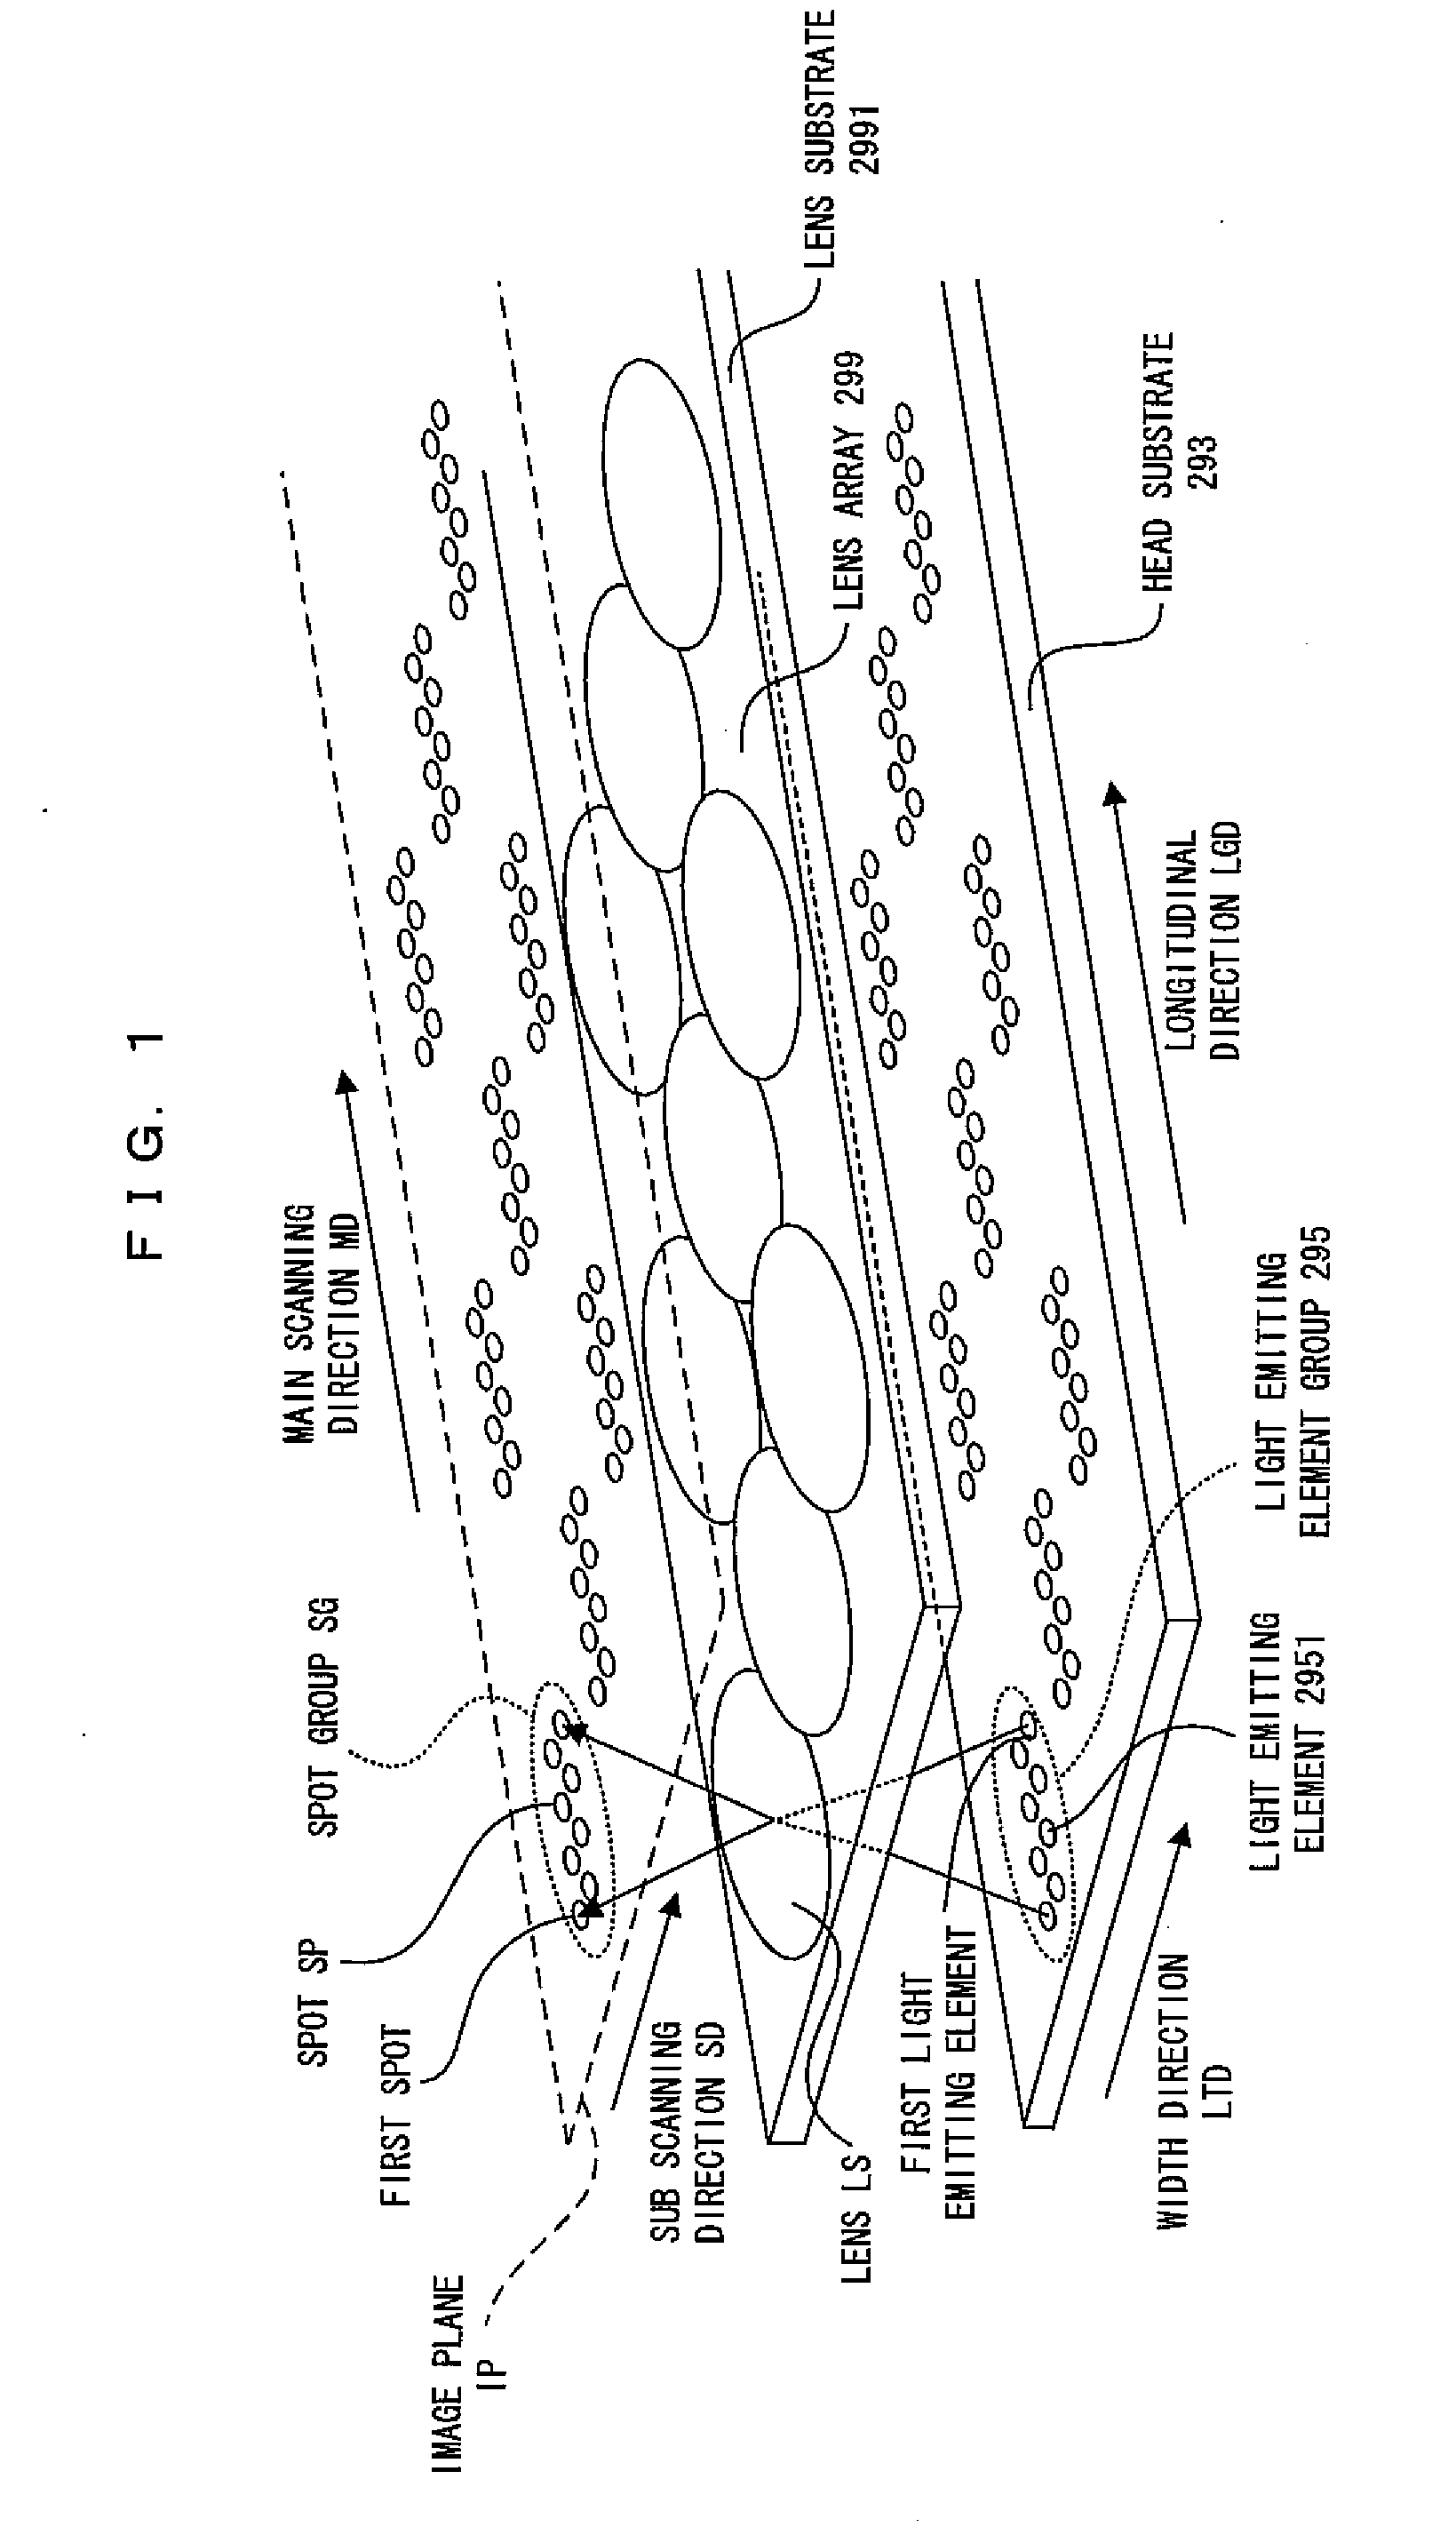 Exposure Head and an Image Forming Apparatus